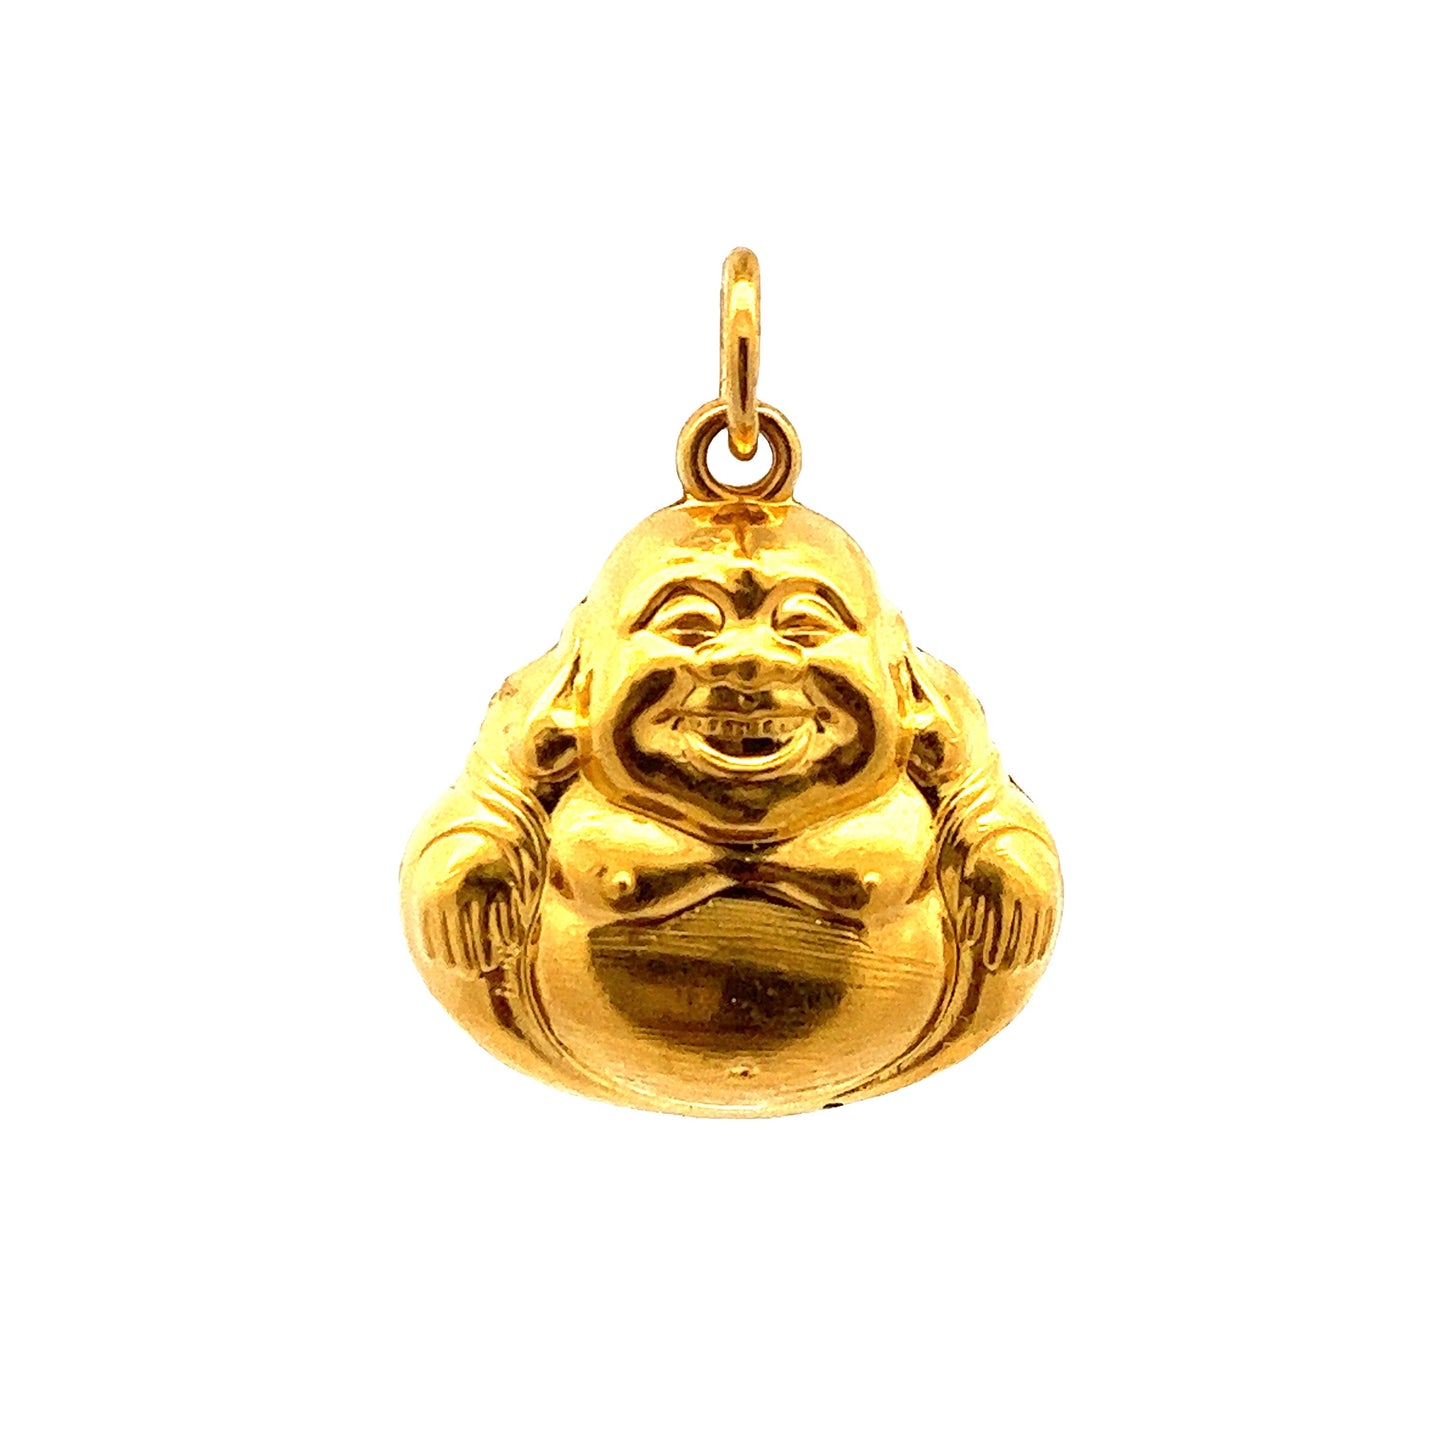 GOLD PENDANT ( 24K ) ( 3.19g ) - 0014744 Chain sold separately